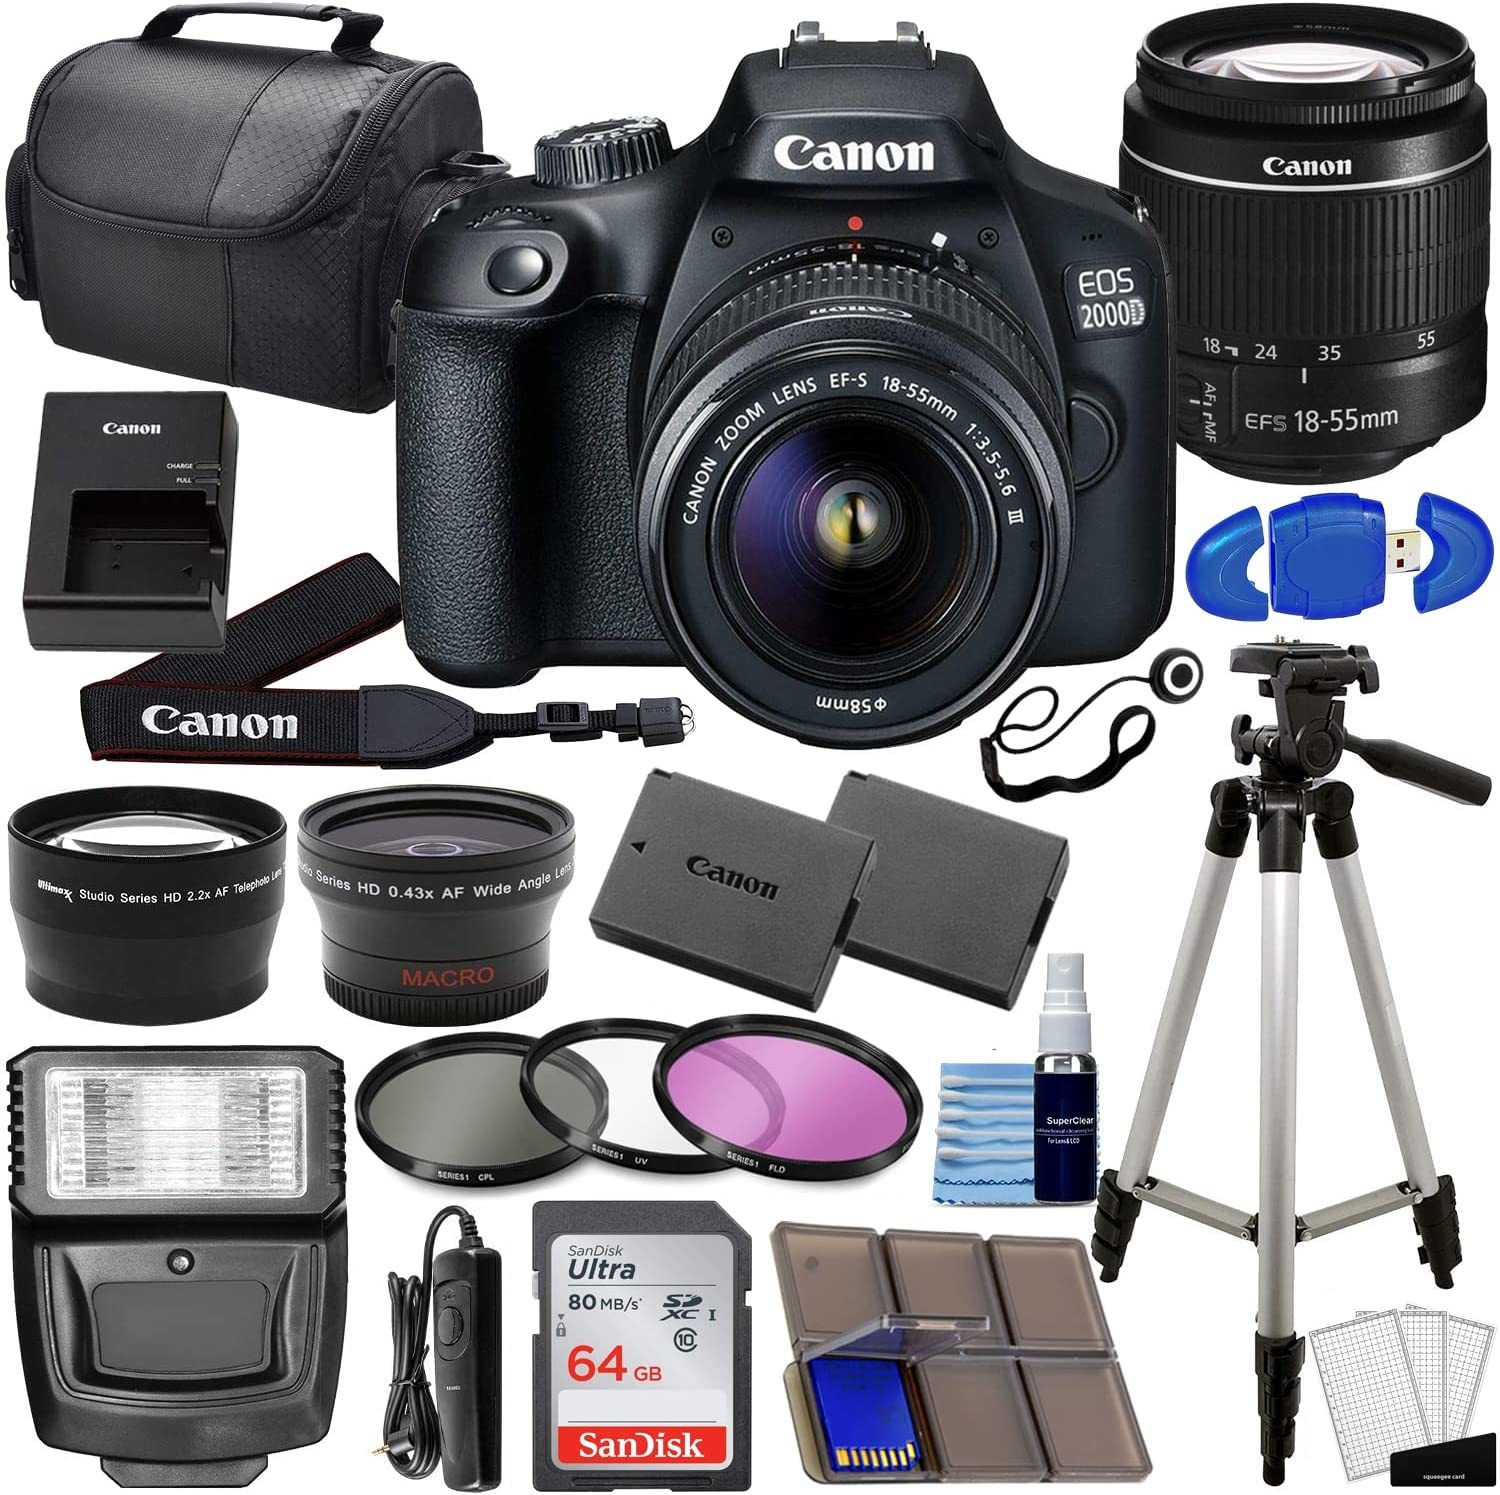 Complete Photo Bundle For The Canon Eos 2000D (Rebel T7) Dslr Camera, And Case. - $565.96